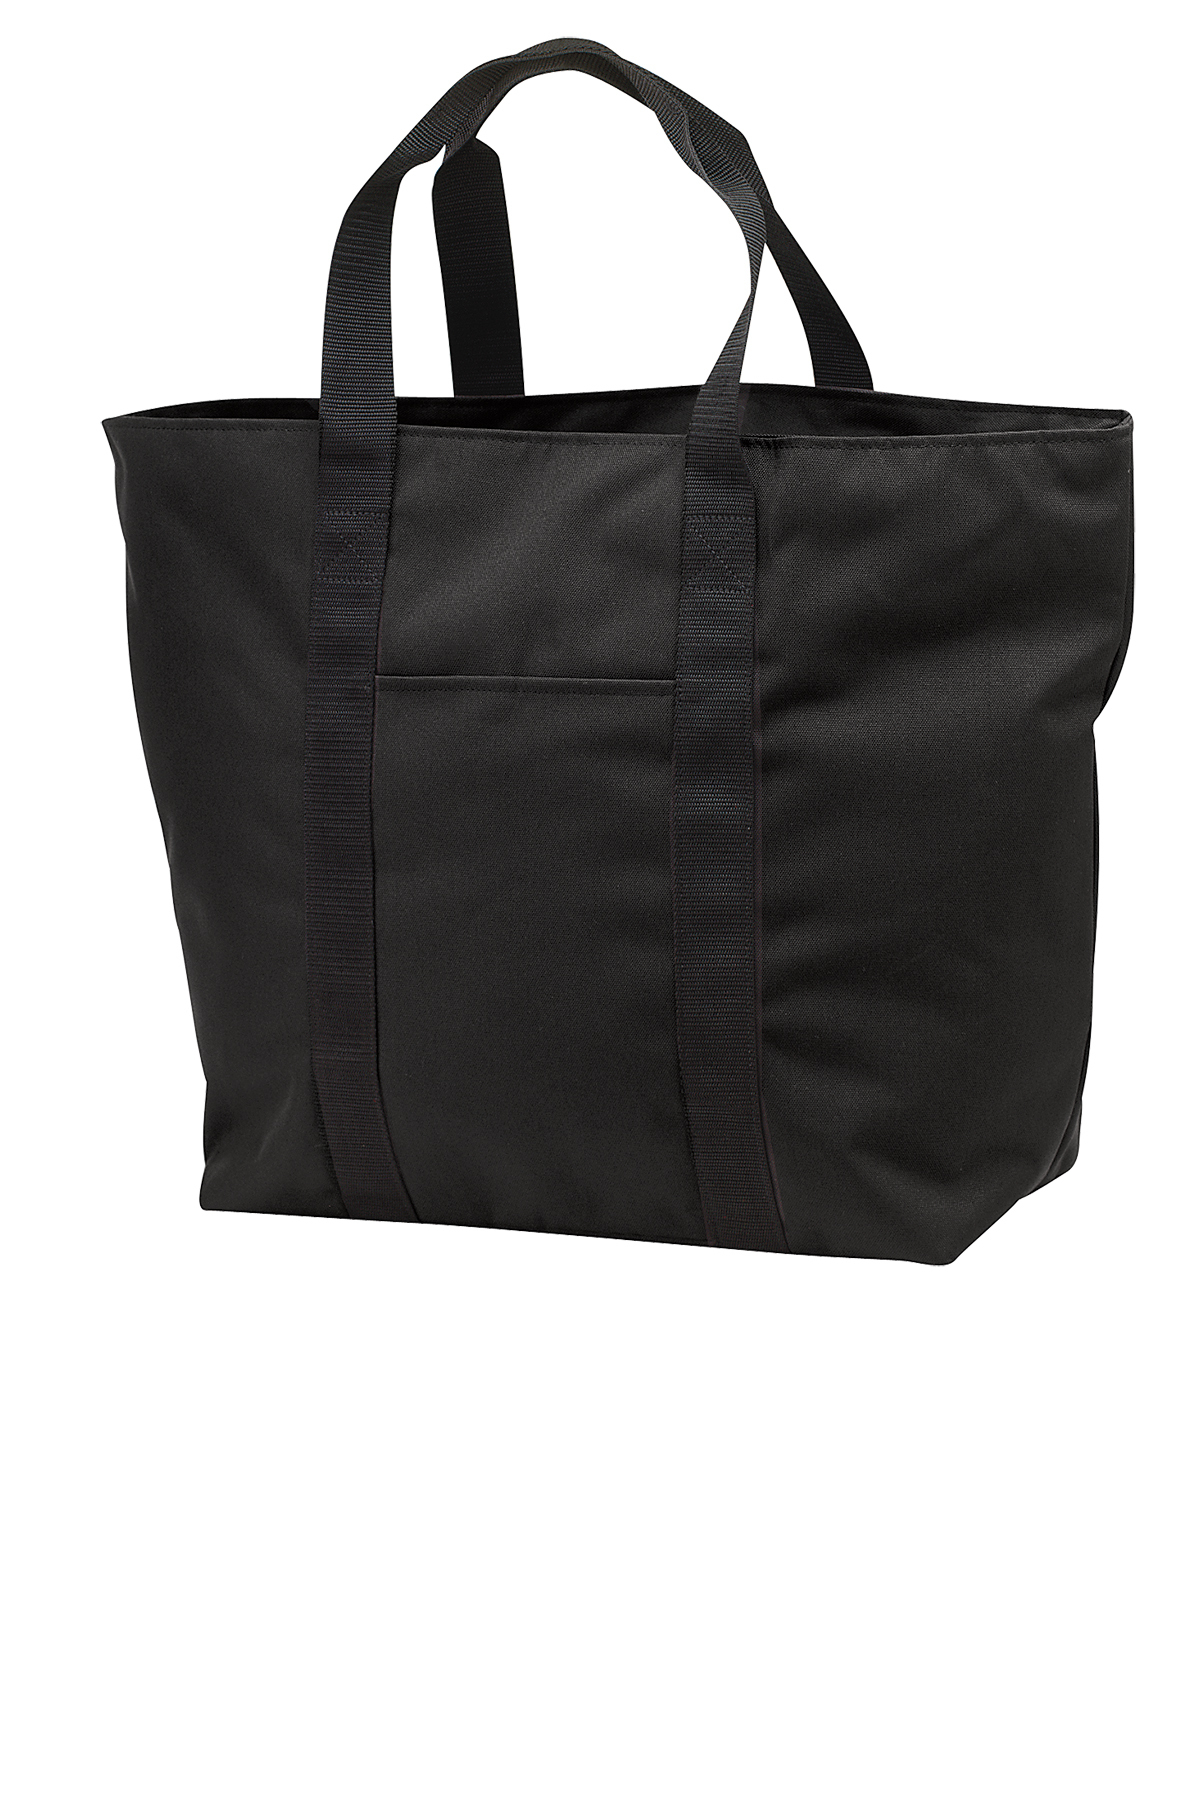 Port Authority All-Purpose Tote | Product | SanMar